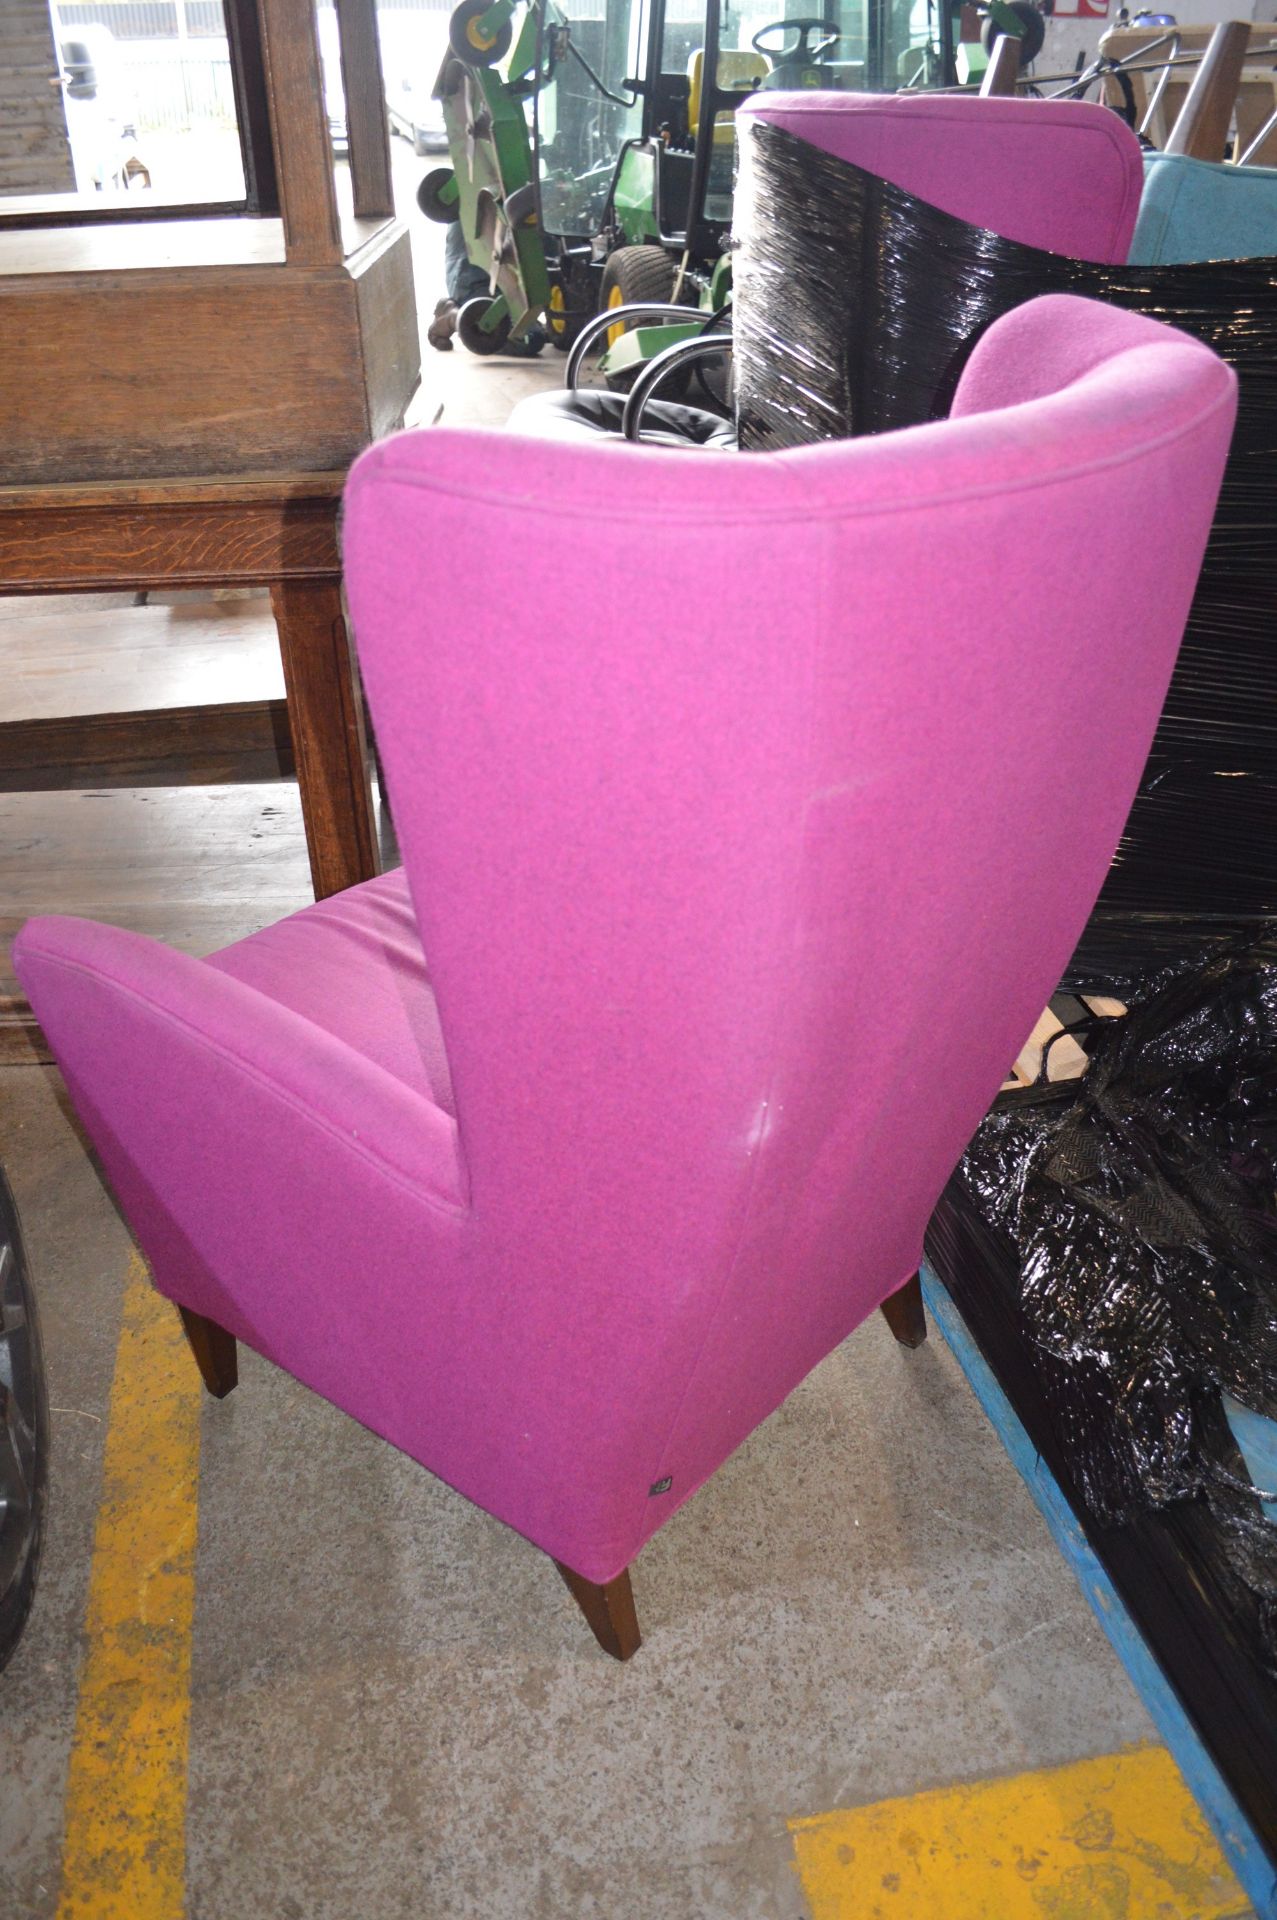 X1 LARGE HIGH BACK BLUE CLOTH CHAIR & X1 LARGE HIGH BACK PINK CLOTH CHAIR *NO VAT* - Image 7 of 7